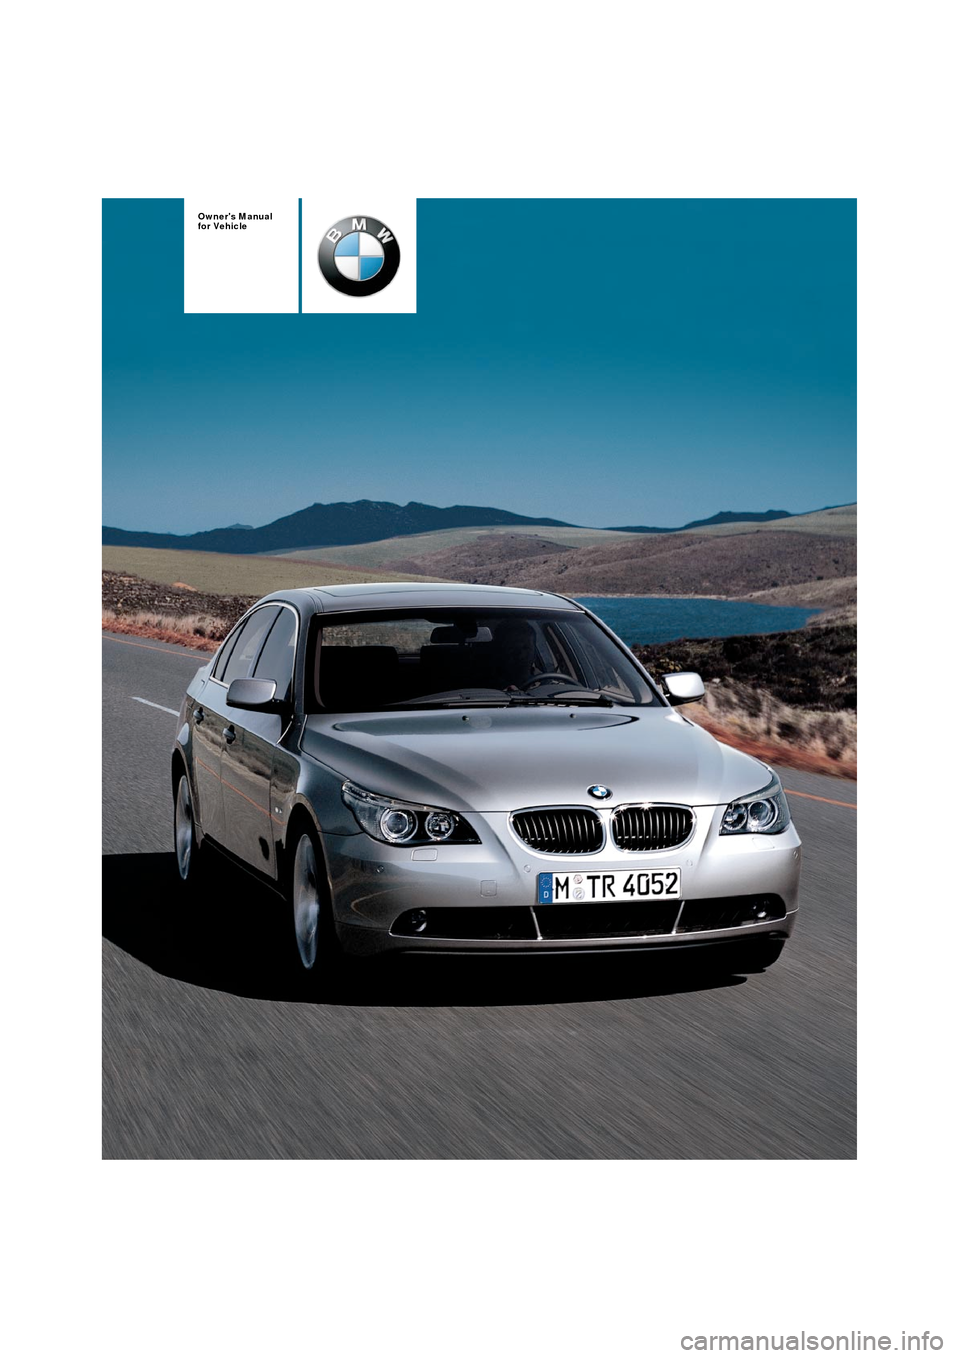 BMW 530I SEDAN 2004 E60 Owners Manual  
Owners Manual
for Vehicle 